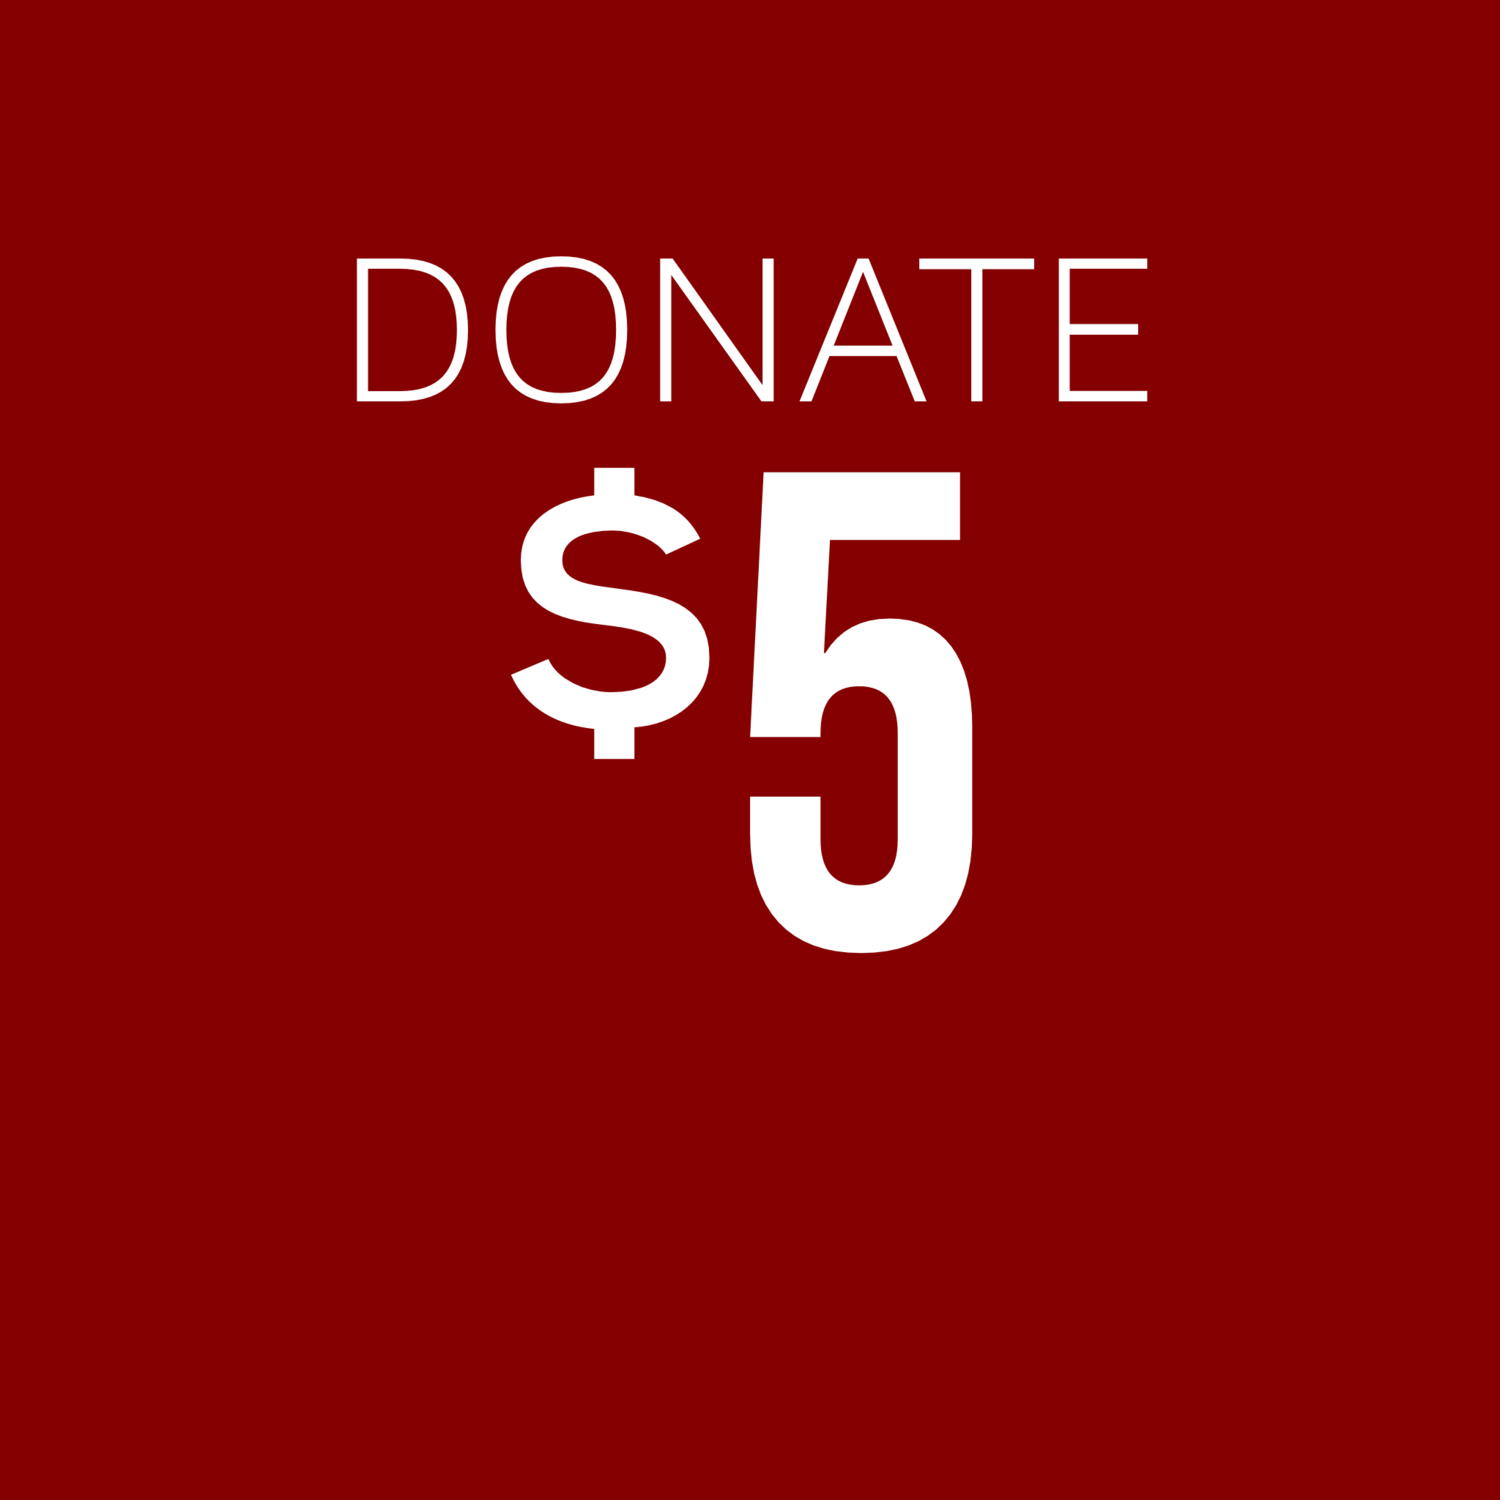 One-time Donation of $5 or More